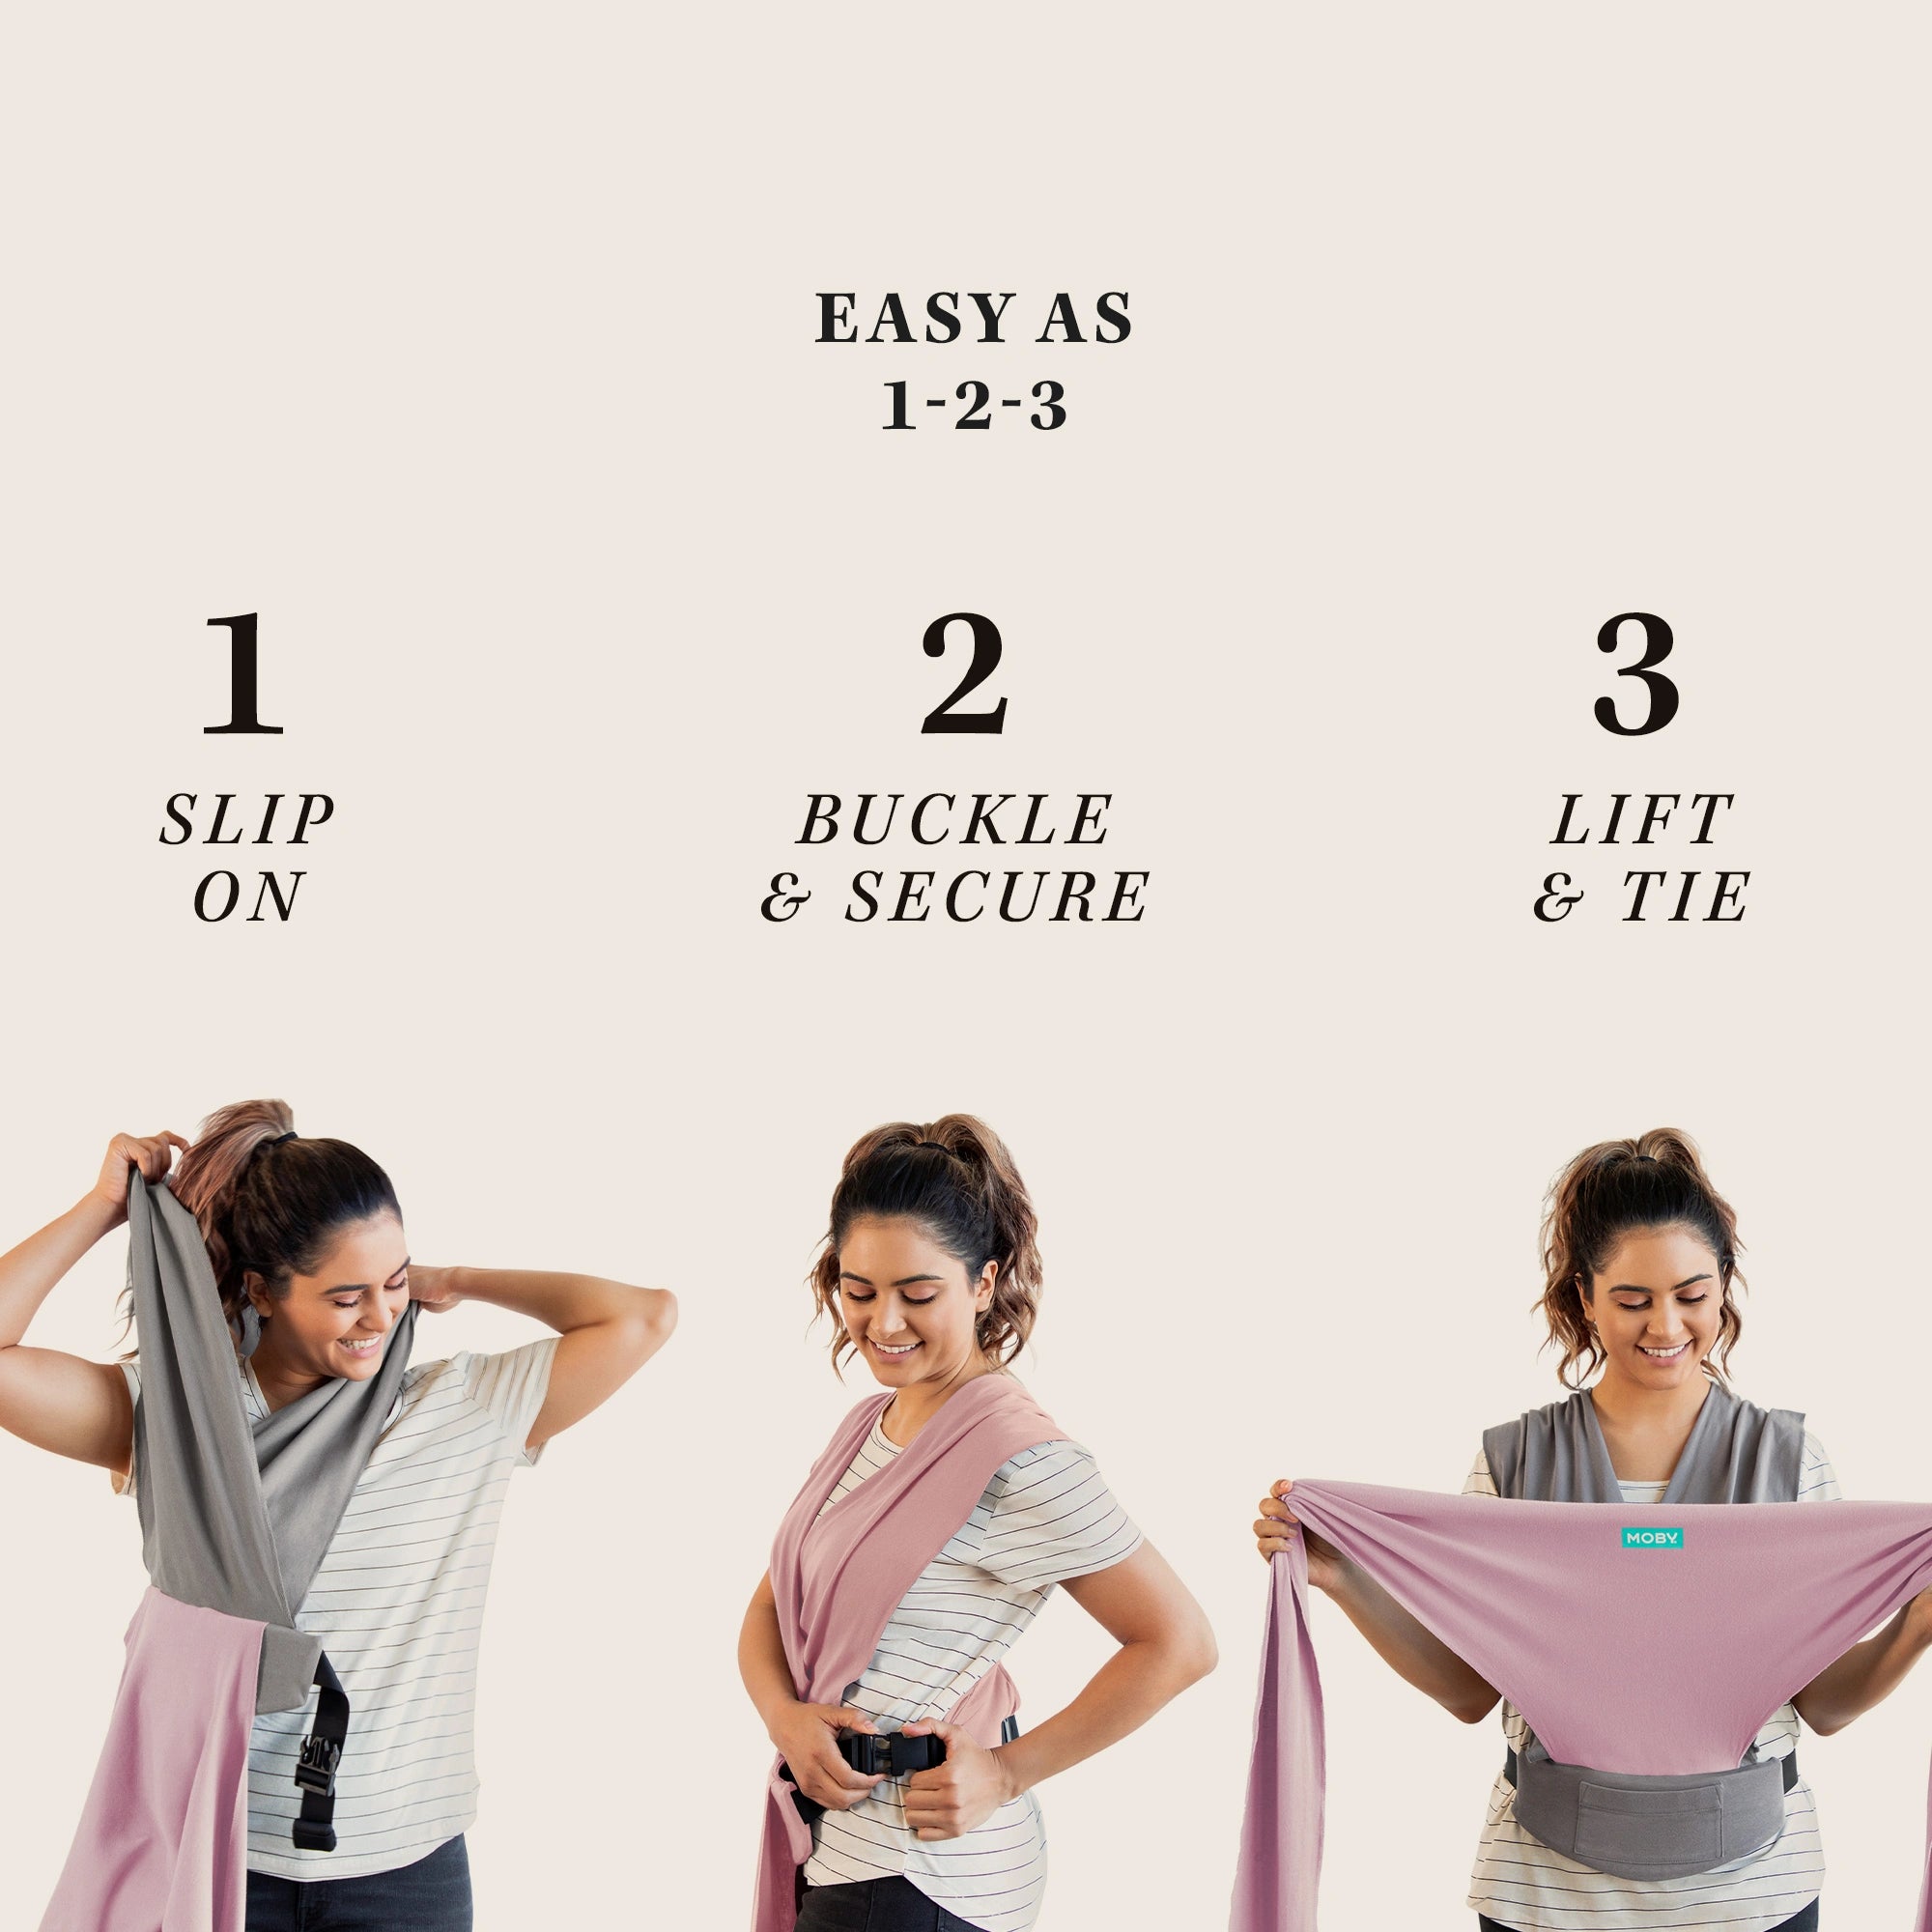 easy-wrap easy as 1-2-3, step 1 slip on, step 2 buckle and secure, step 3 lift and tie